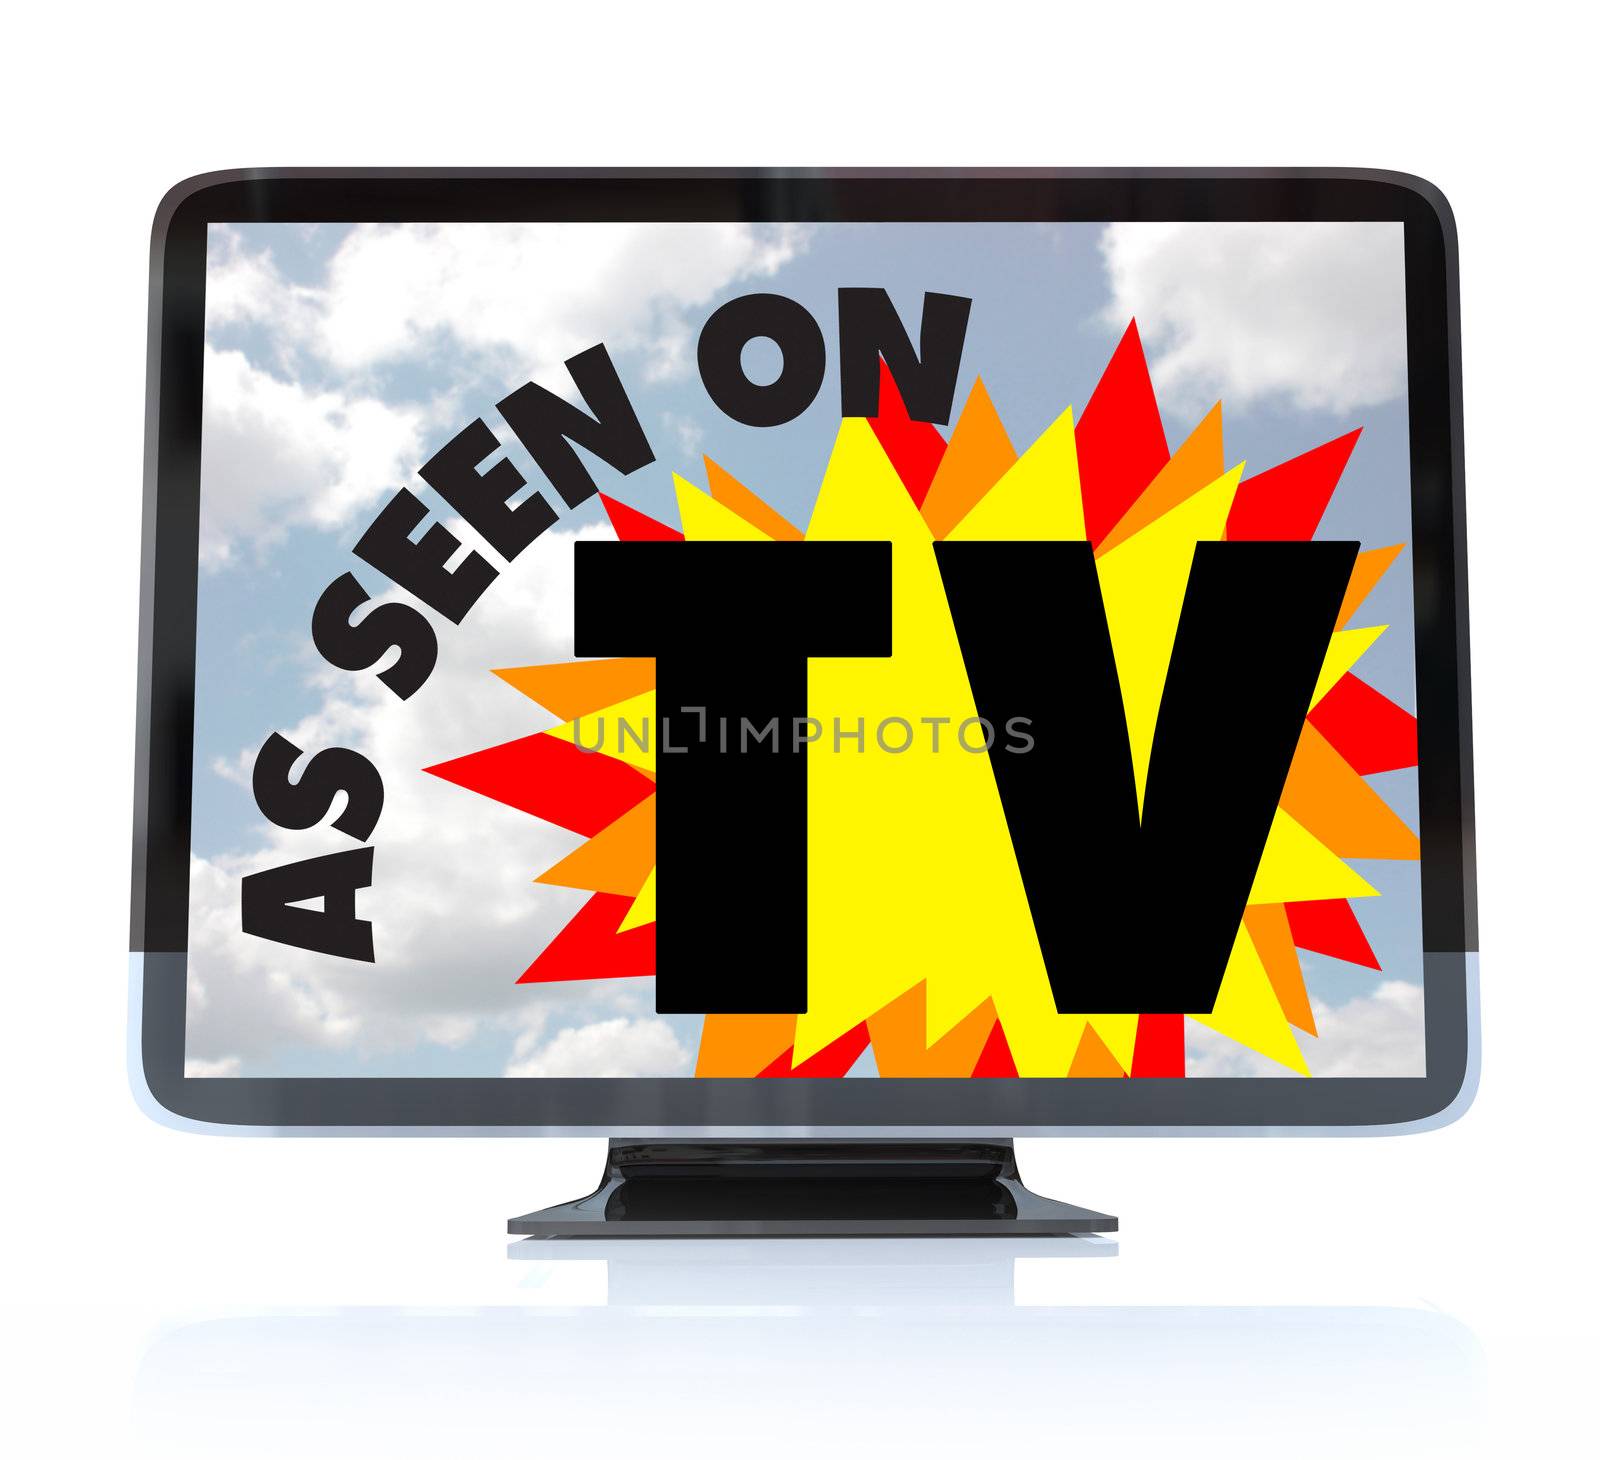 As Seen on TV - High Definition Television HDTV by iQoncept